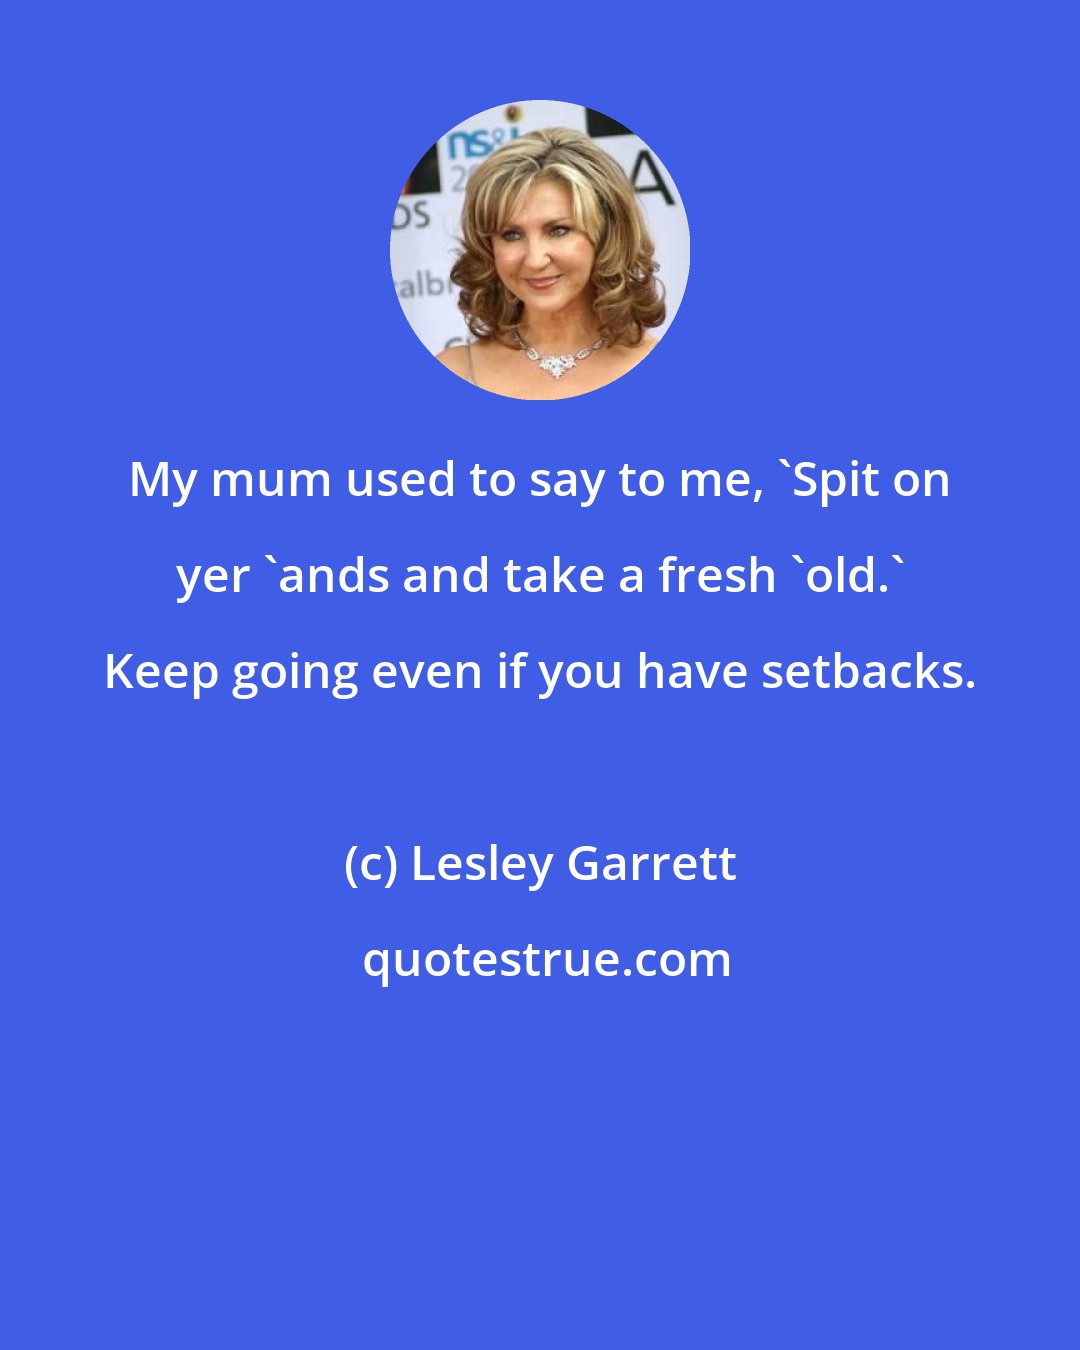 Lesley Garrett: My mum used to say to me, 'Spit on yer 'ands and take a fresh 'old.' Keep going even if you have setbacks.